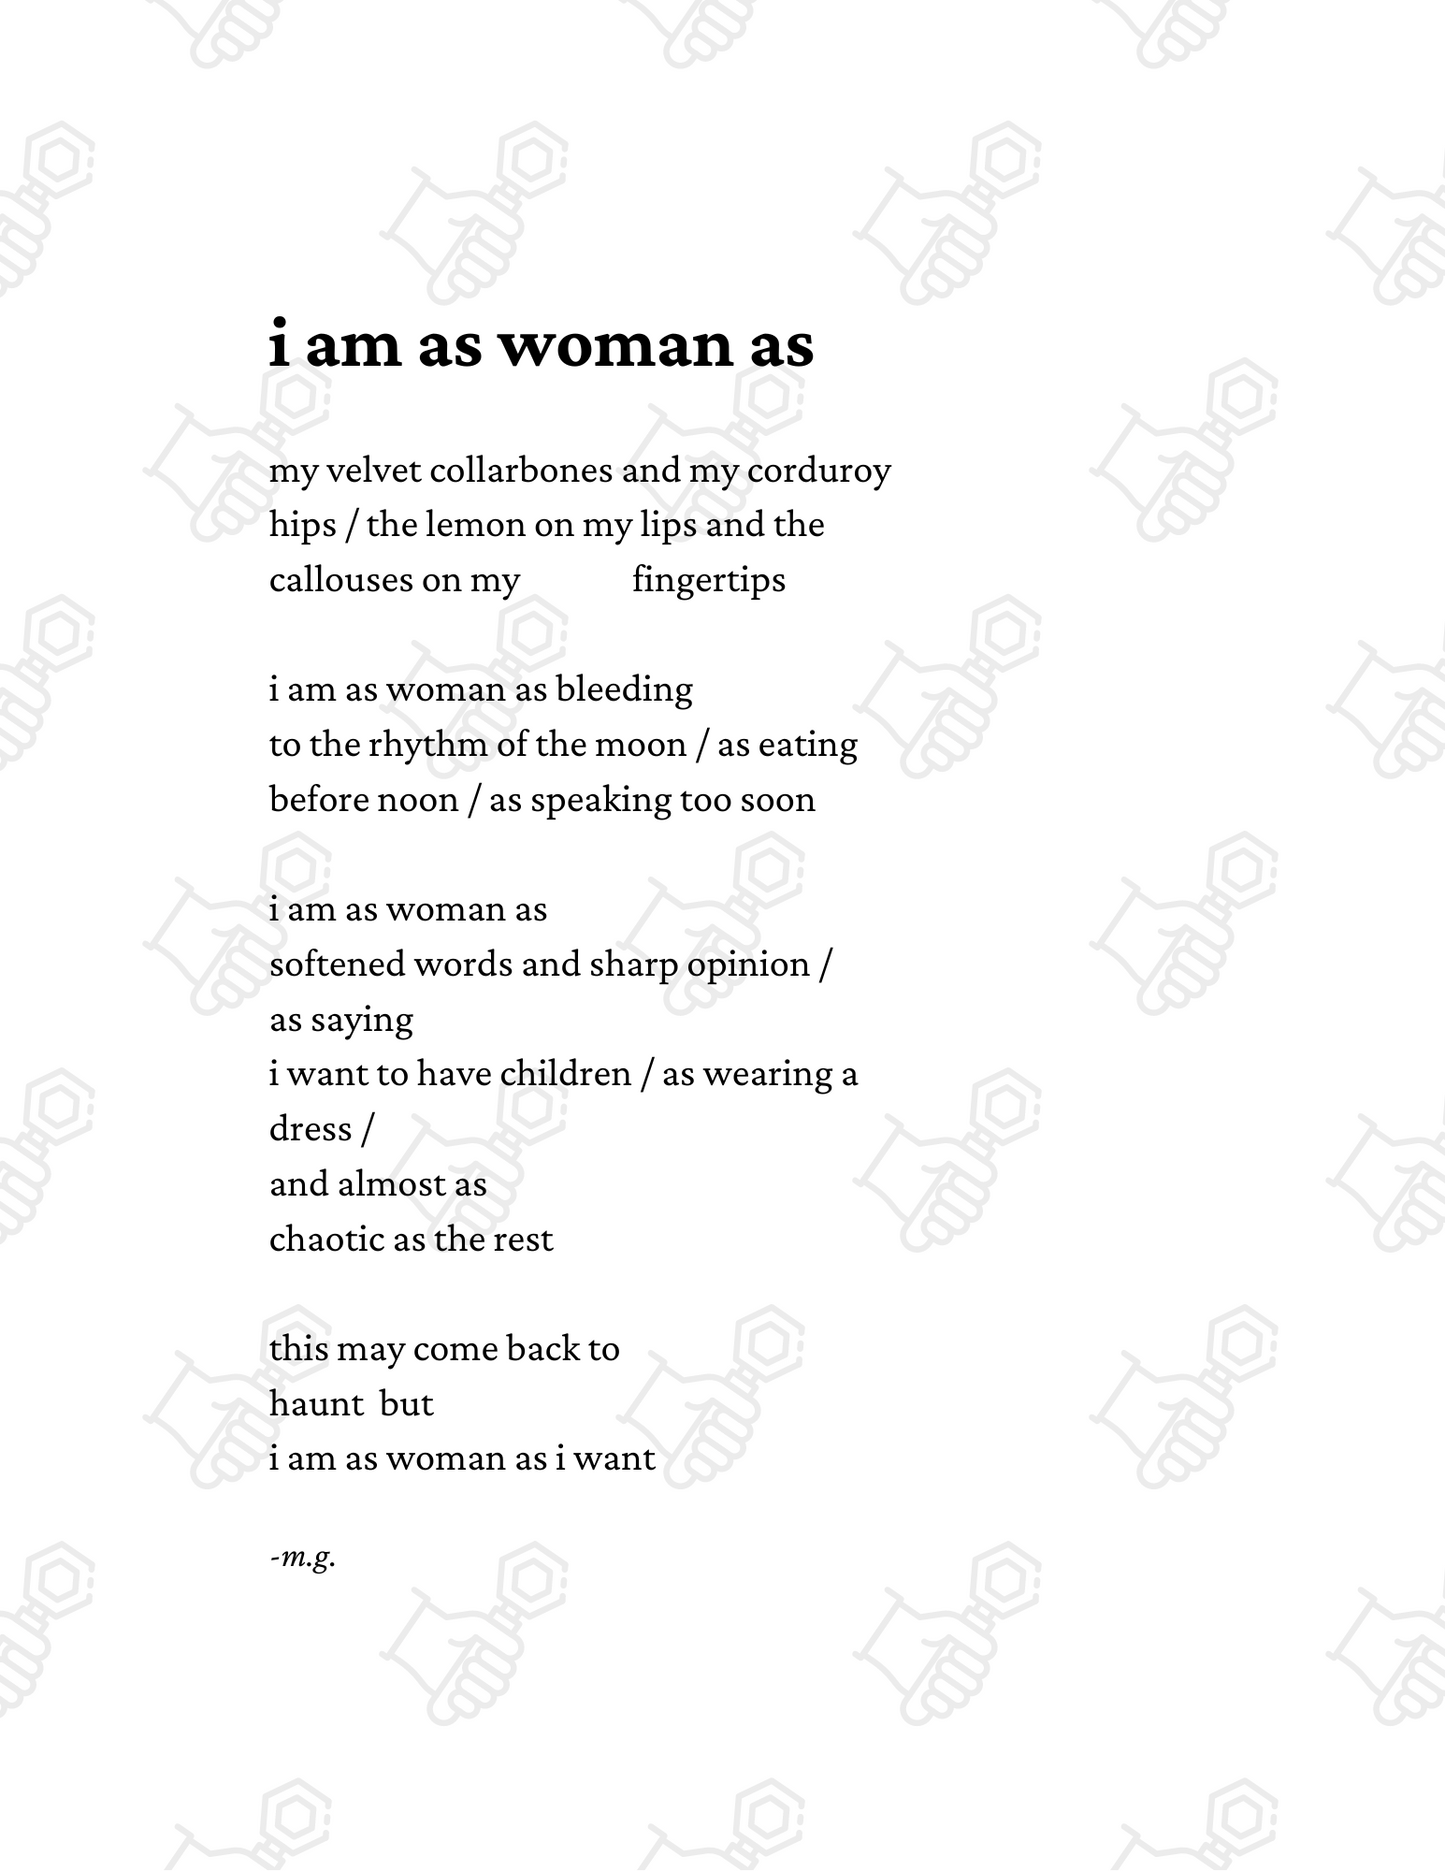 "i am as woman as"